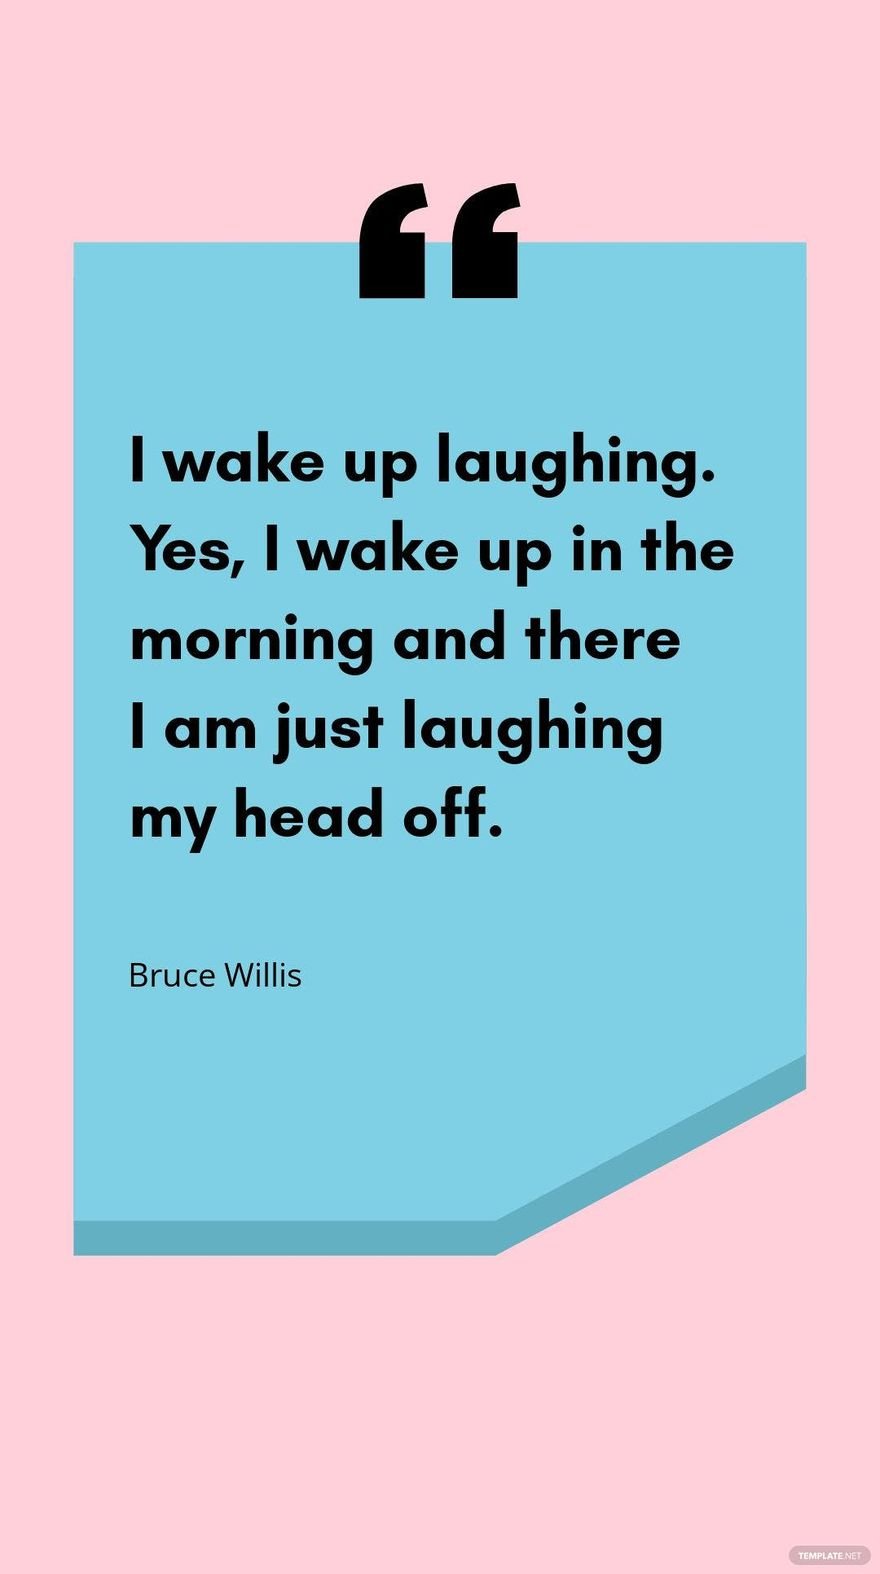 Bruce Willis - I wake up laughing. Yes, I wake up in the morning and there I am just laughing my head off.